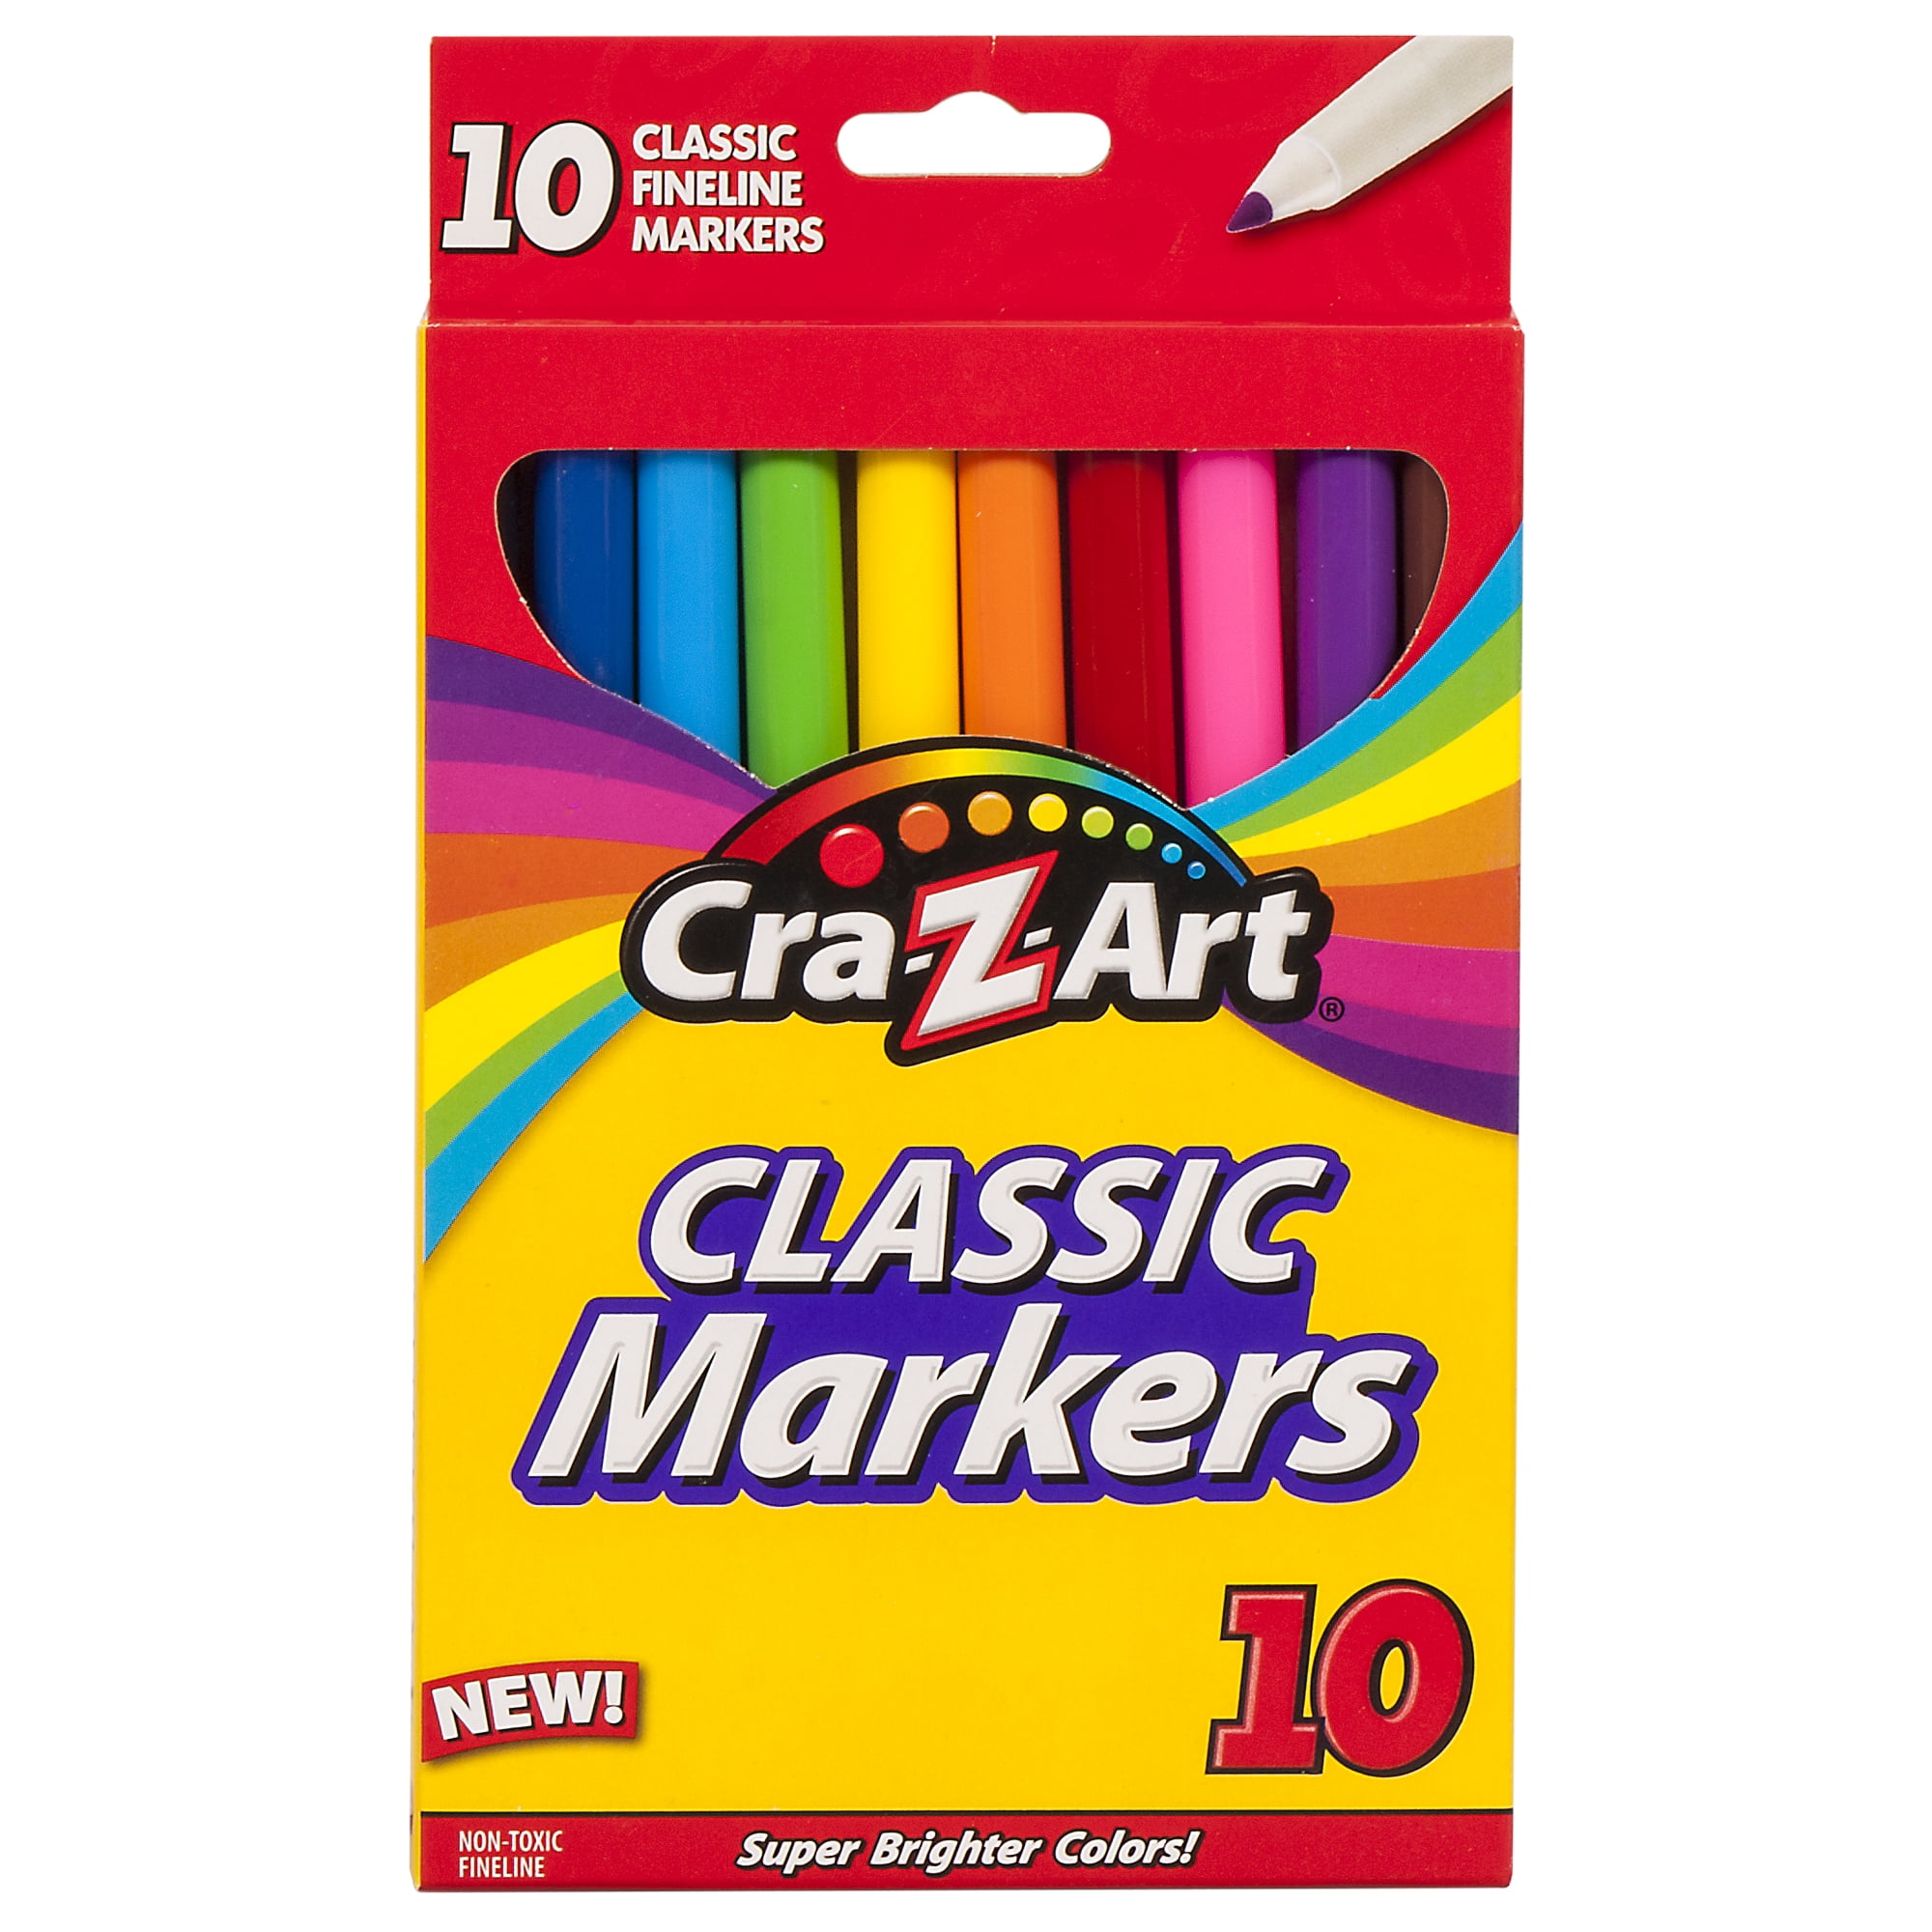 (4 pack) Crayola Classic Thin Line Marker Set, 10 Ct, Multi Colors, Back to  School Supplies for Kids